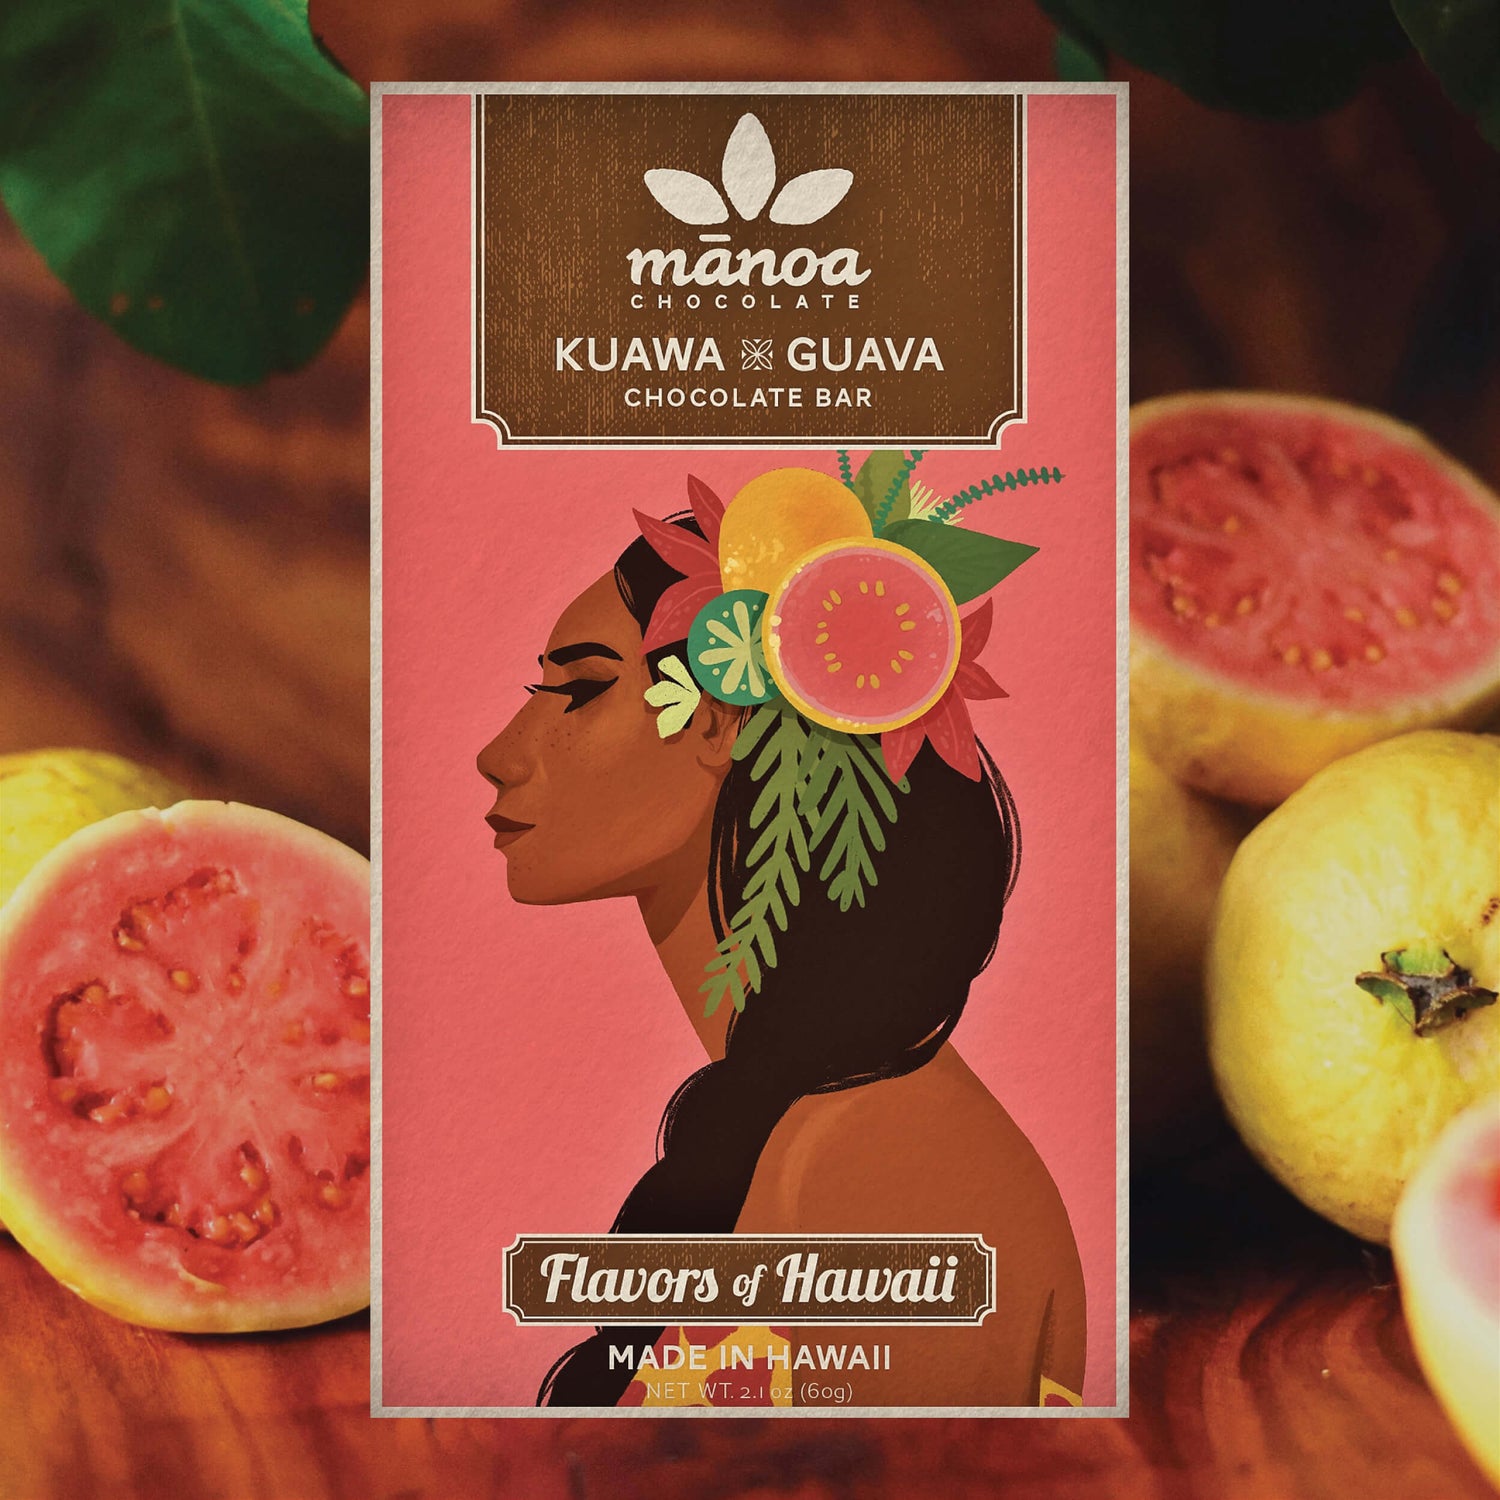 Image of Guava chocolate bar in pink packaging